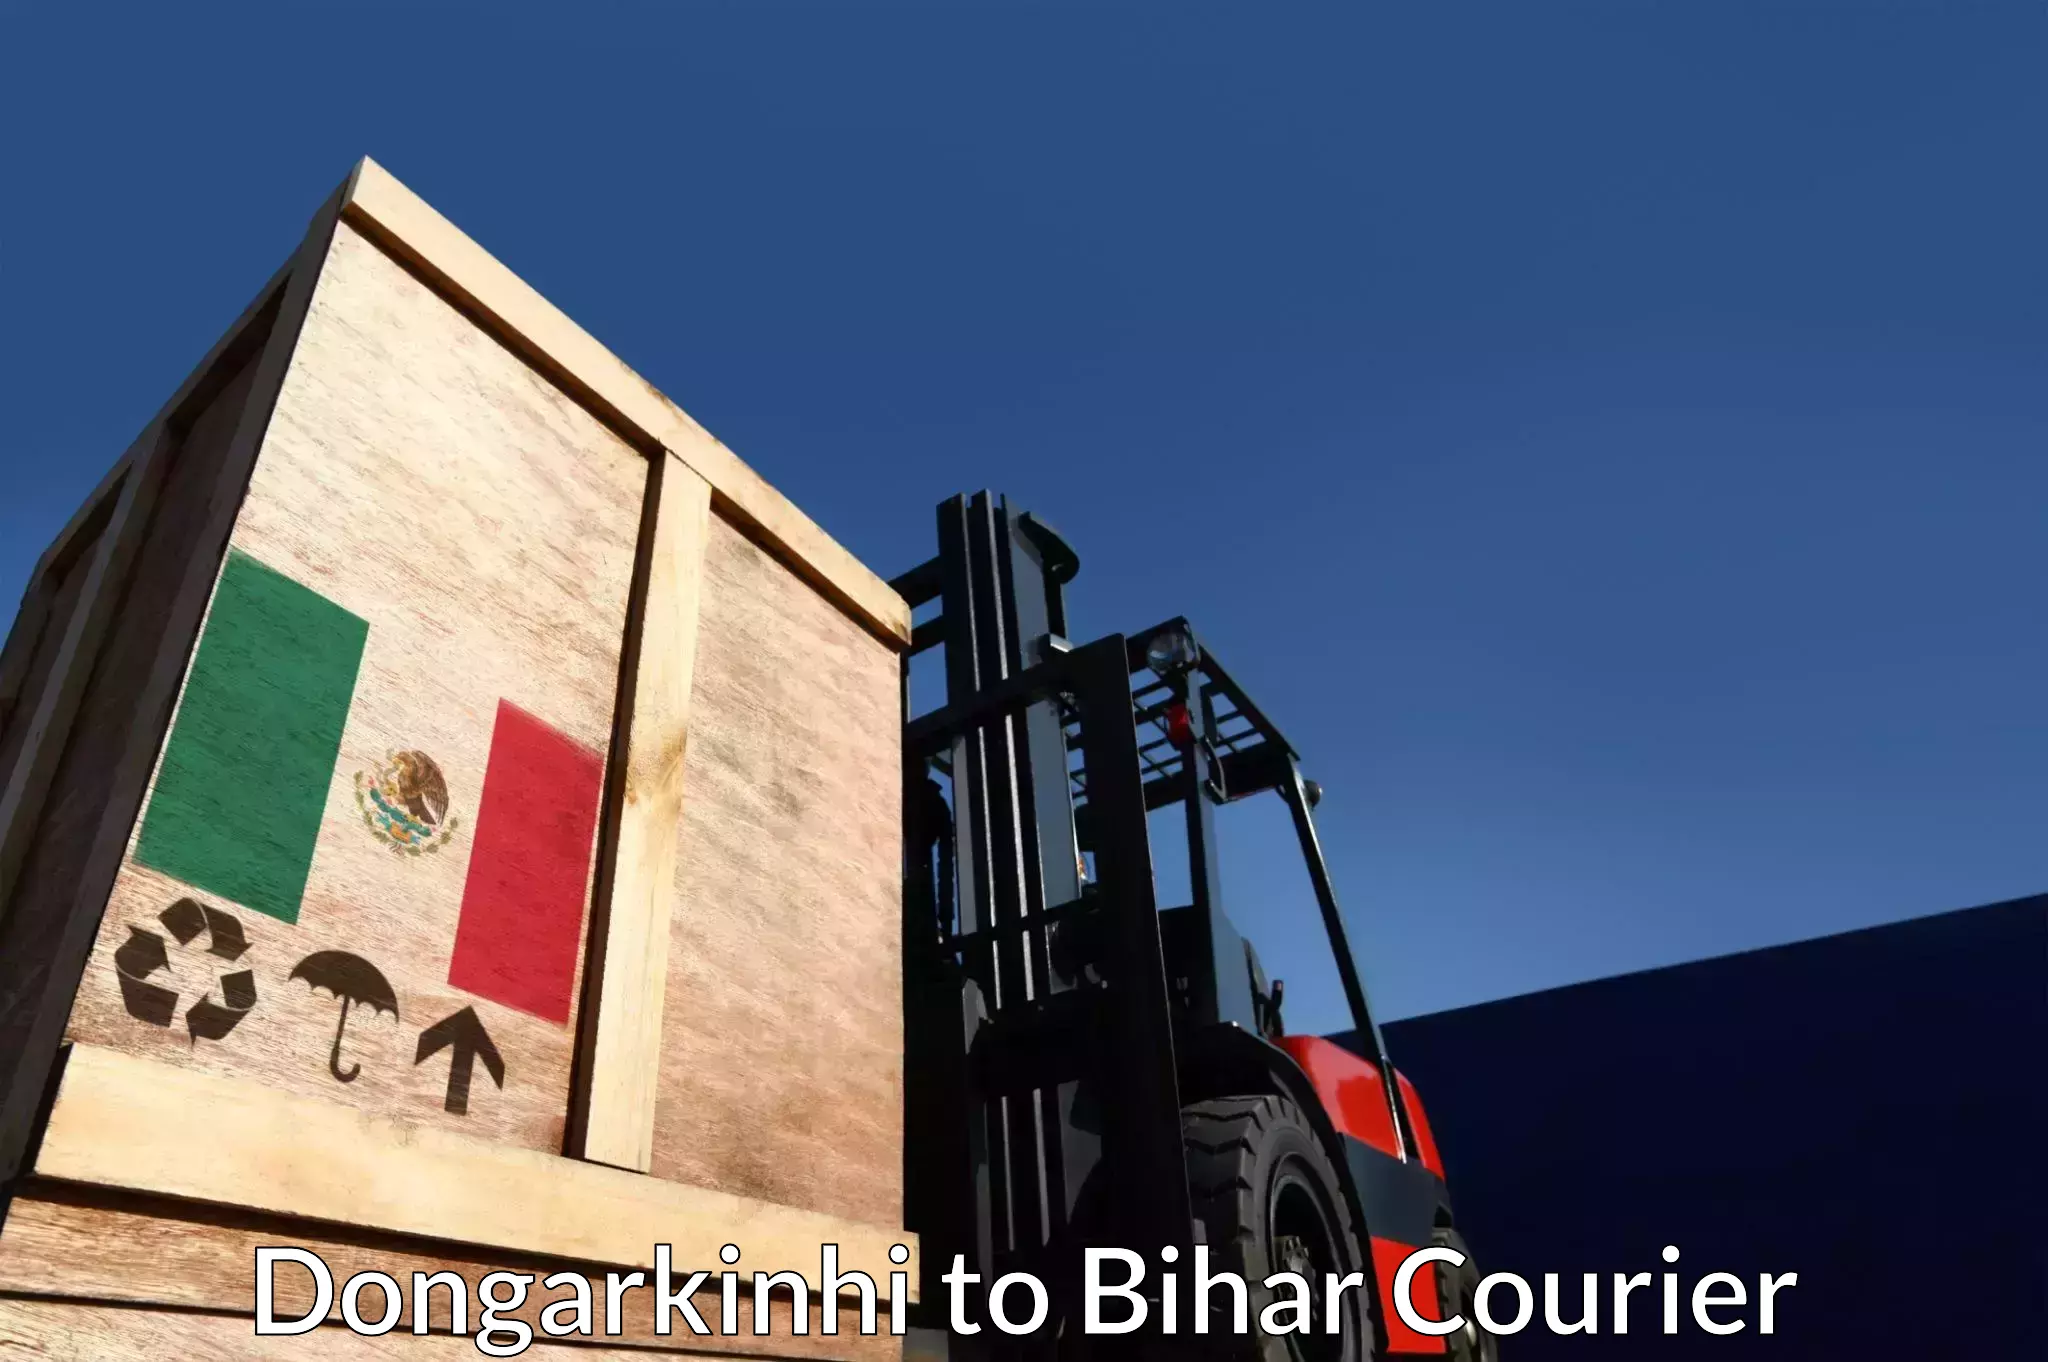 Custom courier packages Dongarkinhi to Biraul